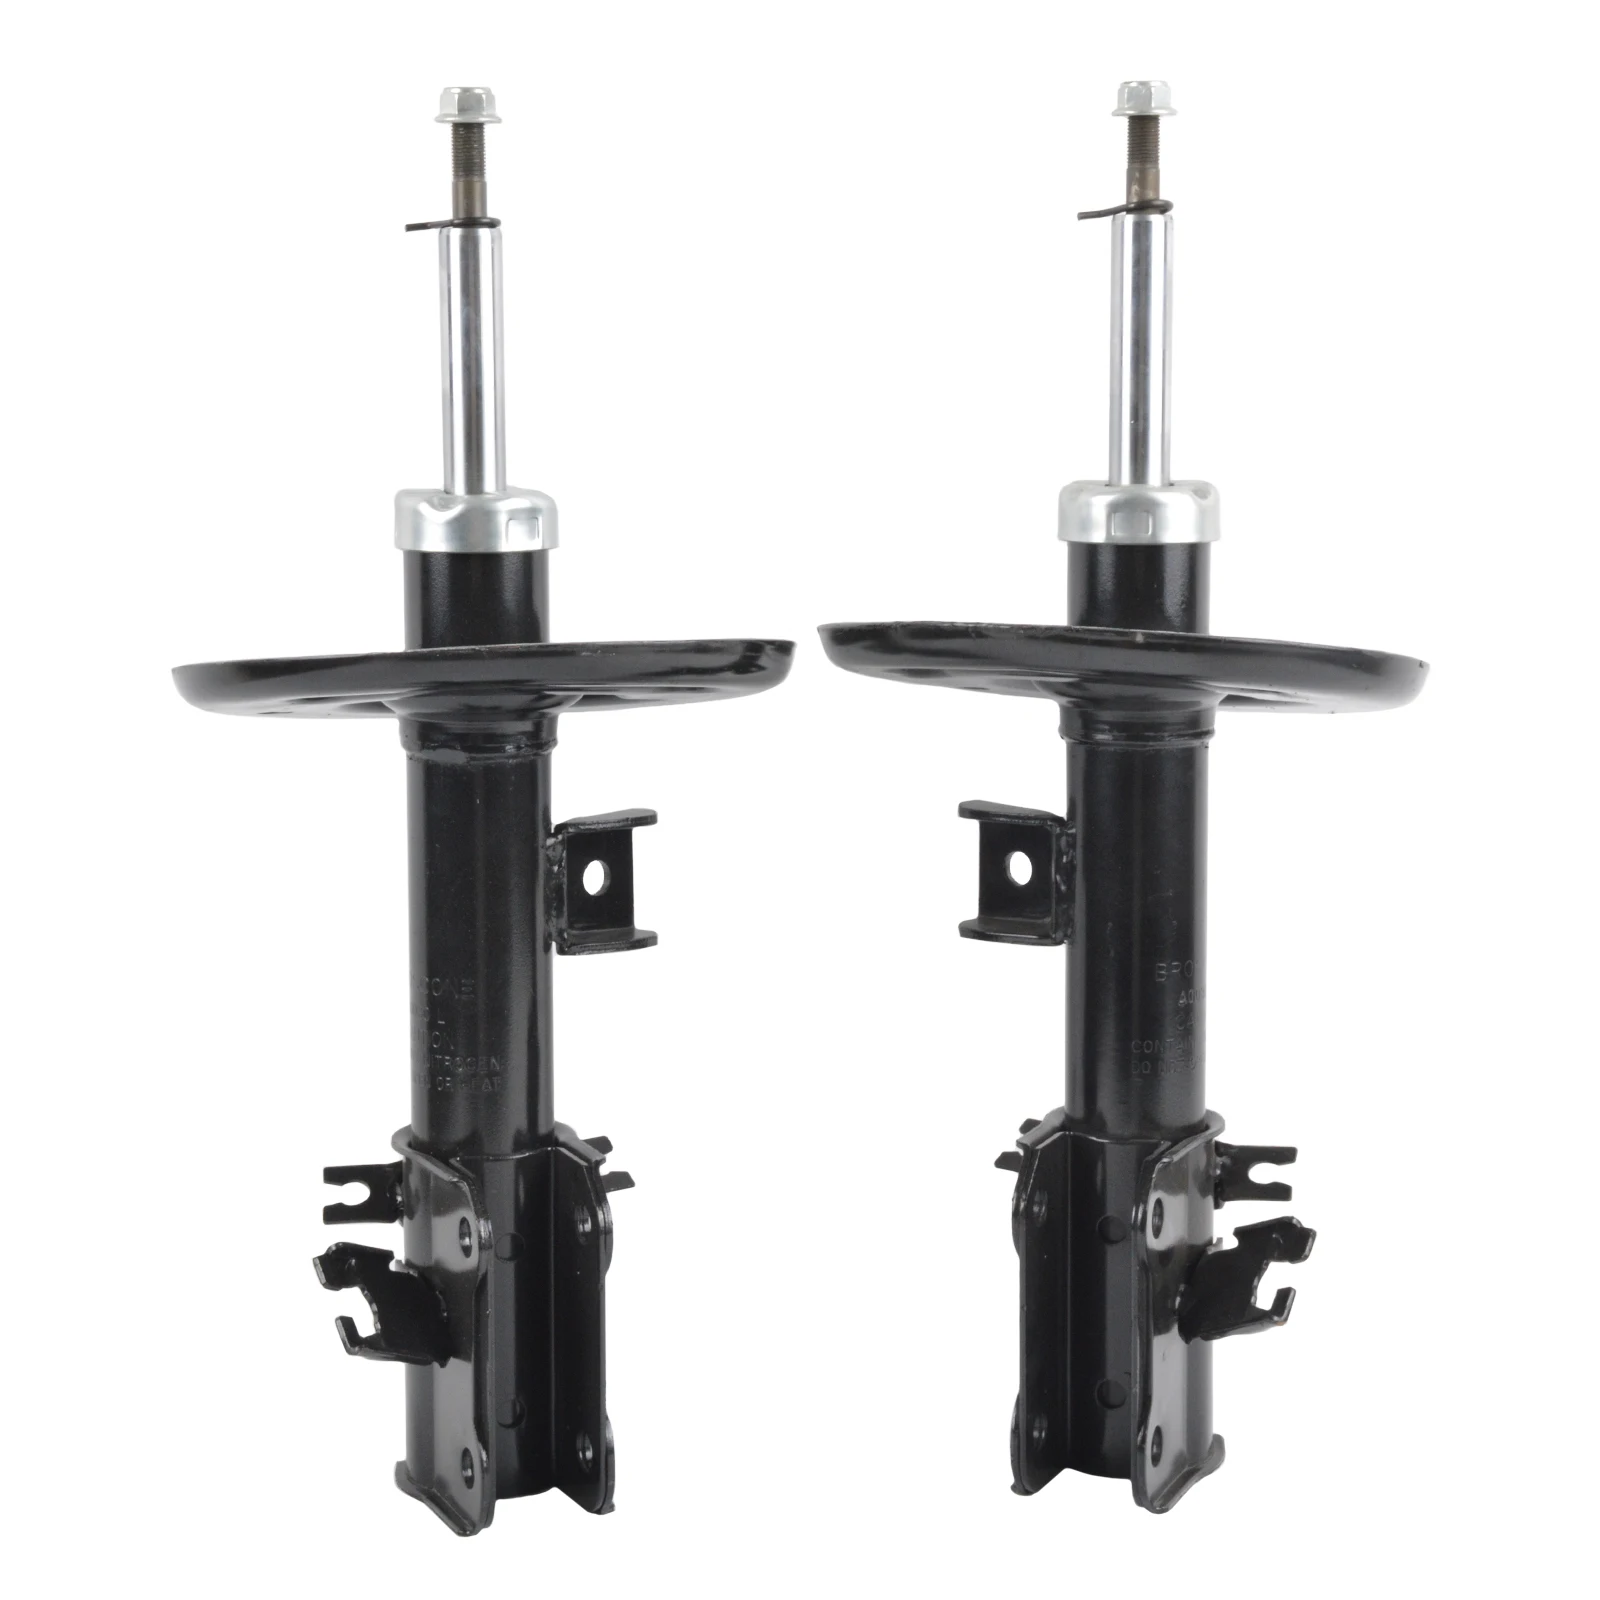 

Free Shipping to US Front LEFT shock absorber assembly for 2007-2013 NISSAN-ALTIMA